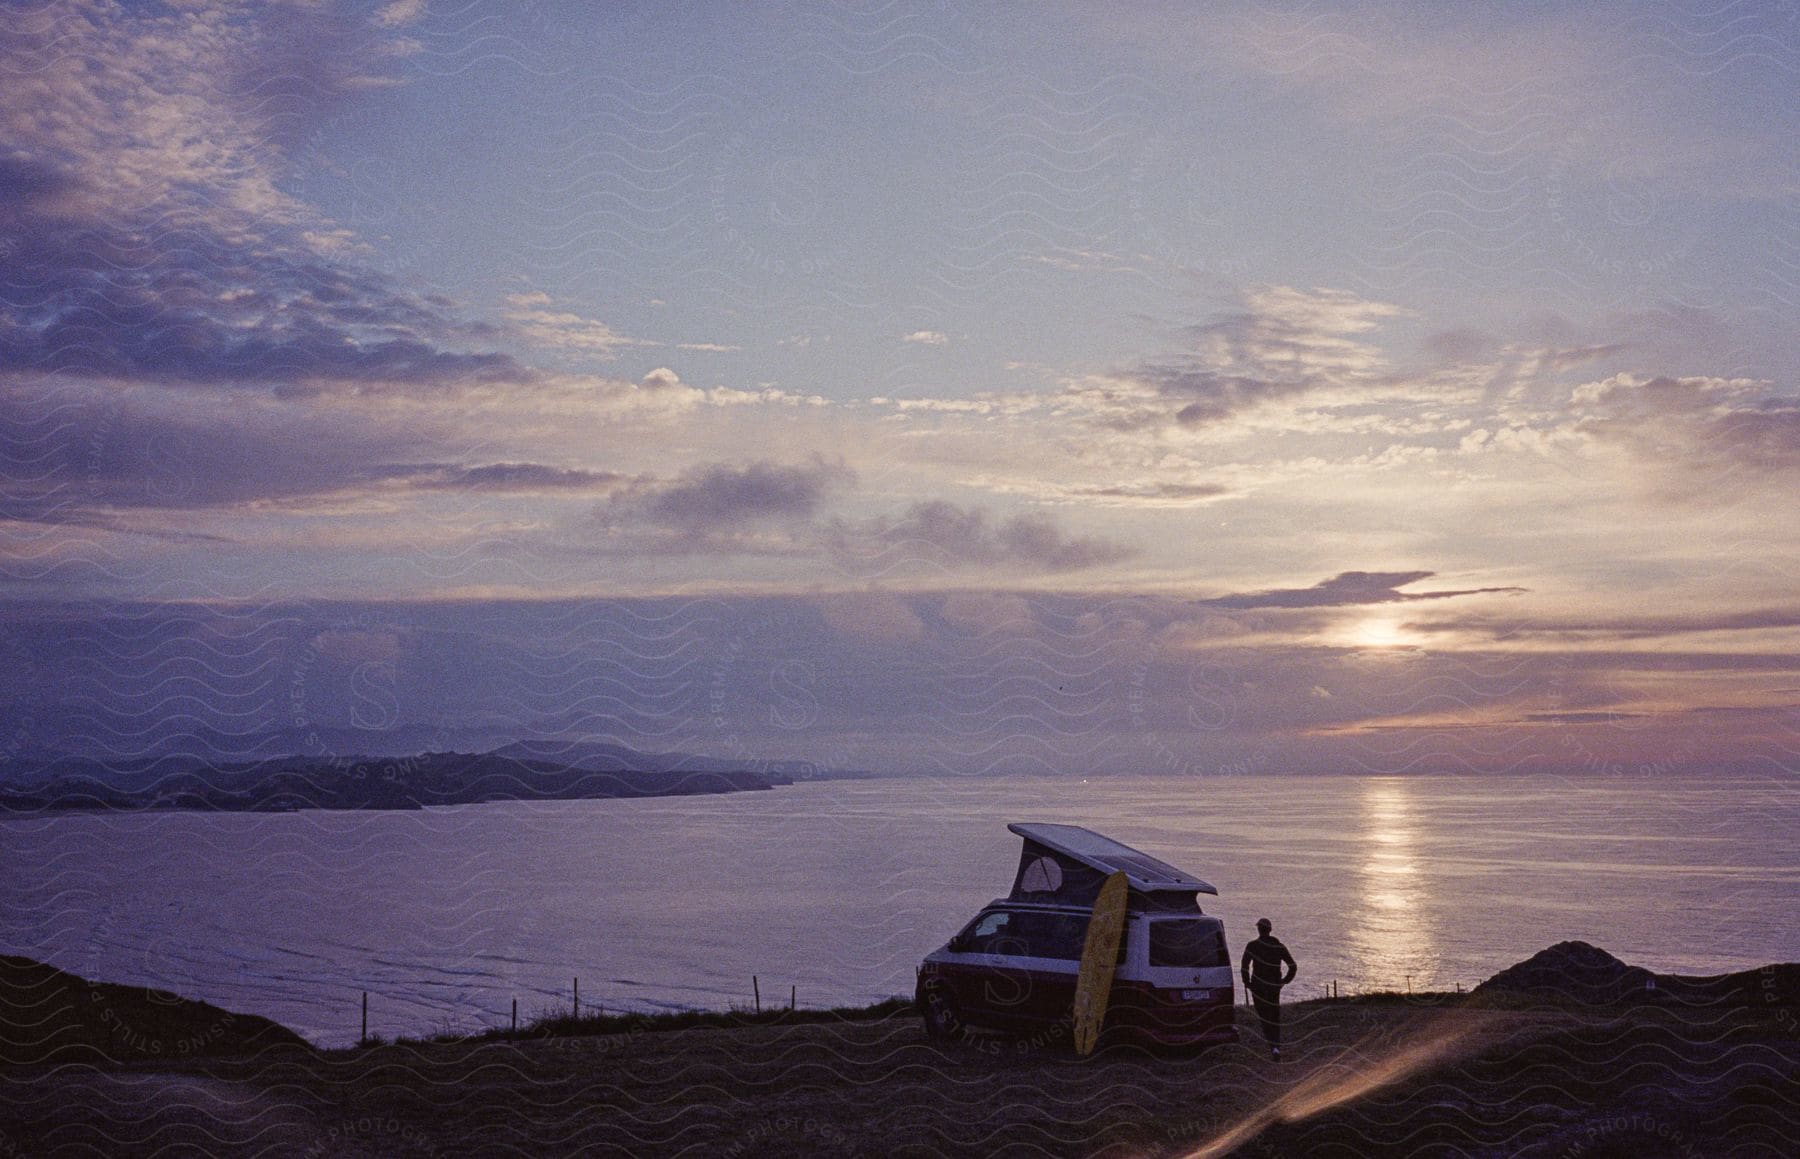 A man stands next to his car near the shoreline at dusk or dawn